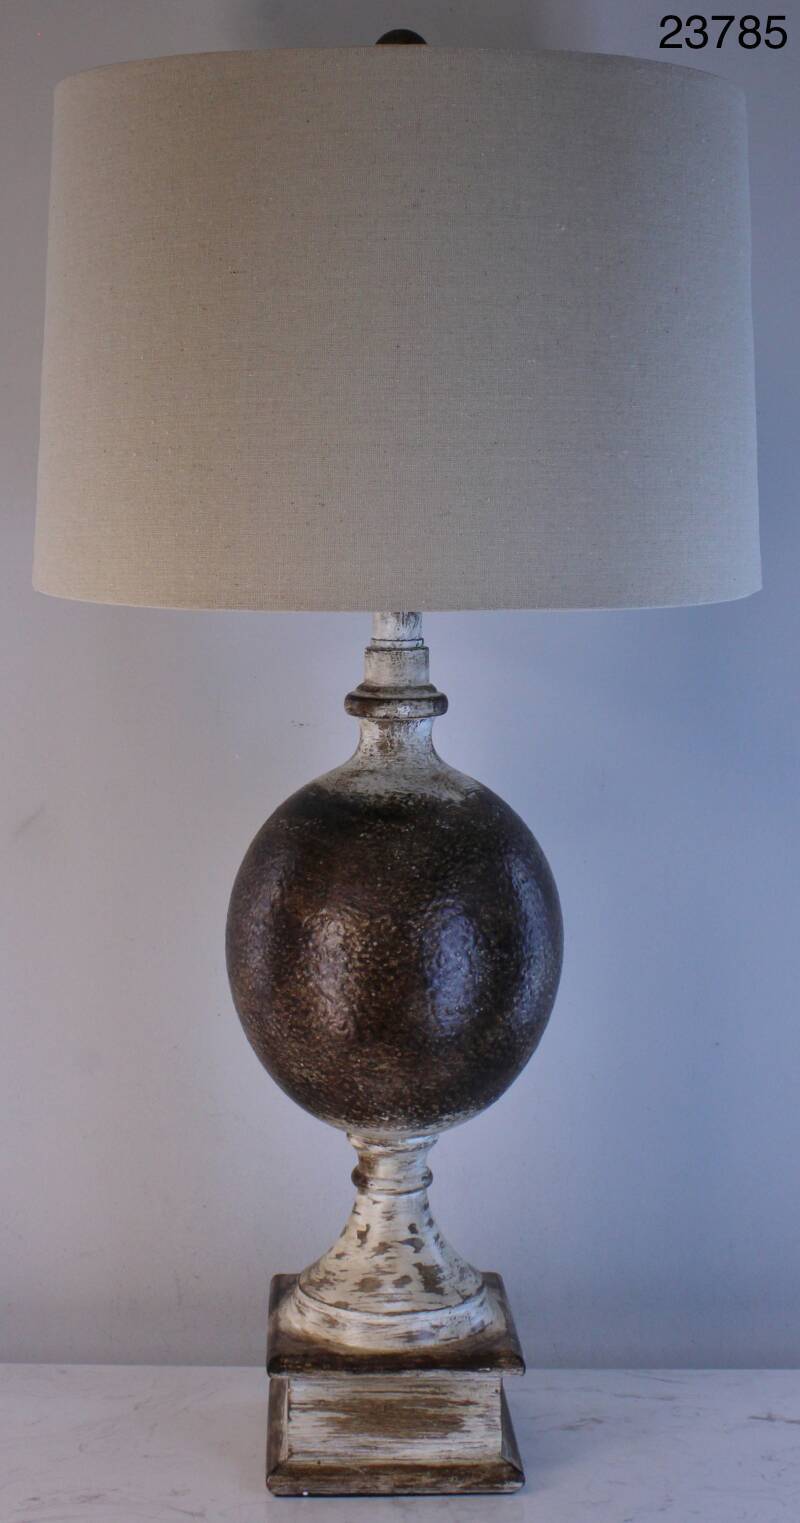 Poly Accent Lamp by Home Accents 23785